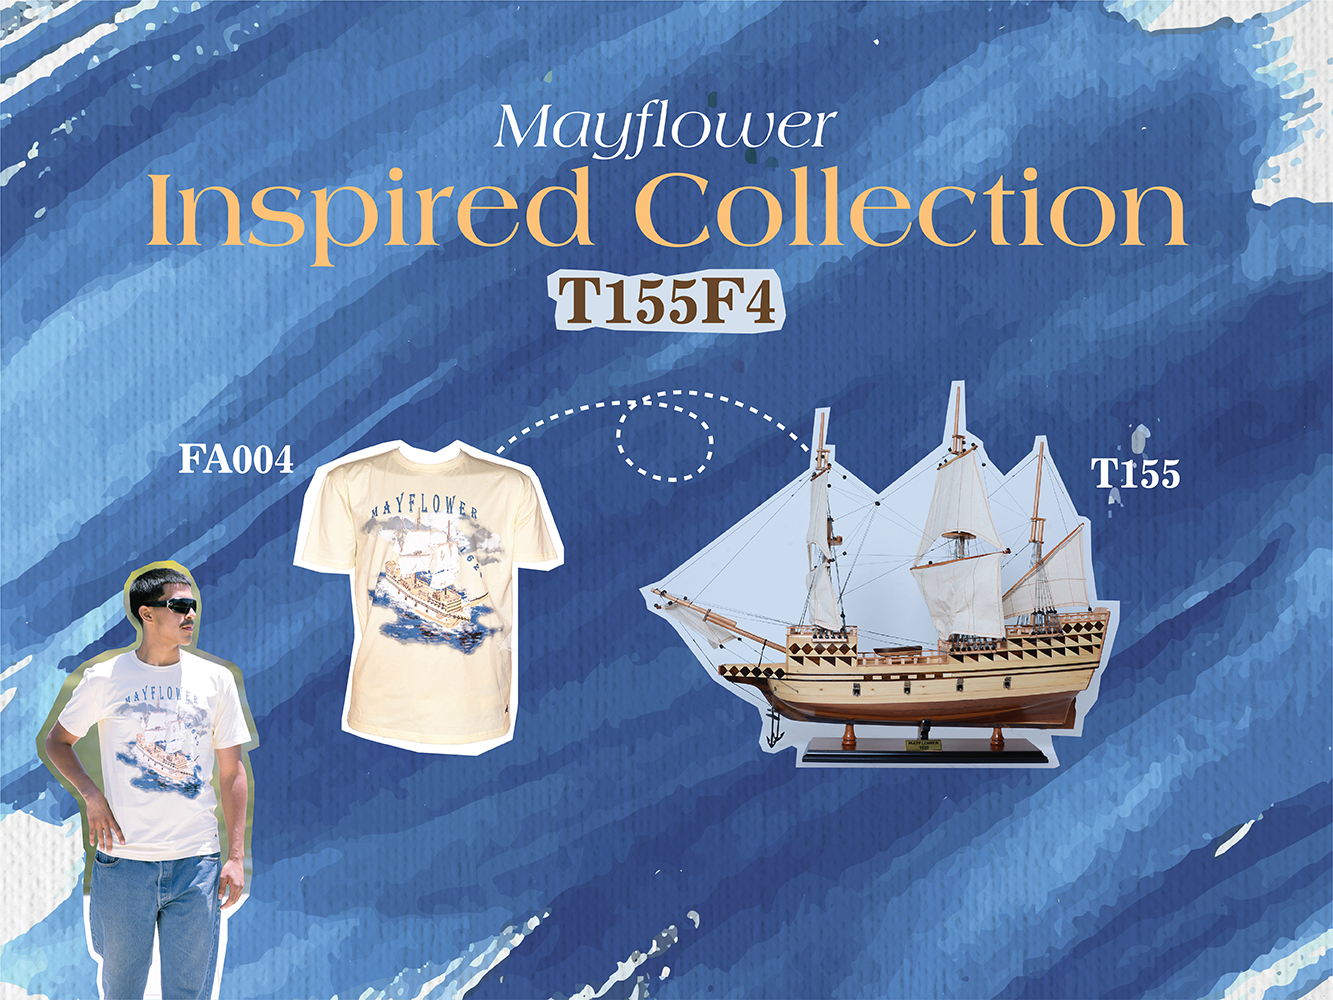 T155F4 Majestic Mayflower Combo: A Model Ship and Iconic T-Shirt t155f4-majestic-mayflower-combo-a-model-ship-and-iconic-tshirt-l01.jpg